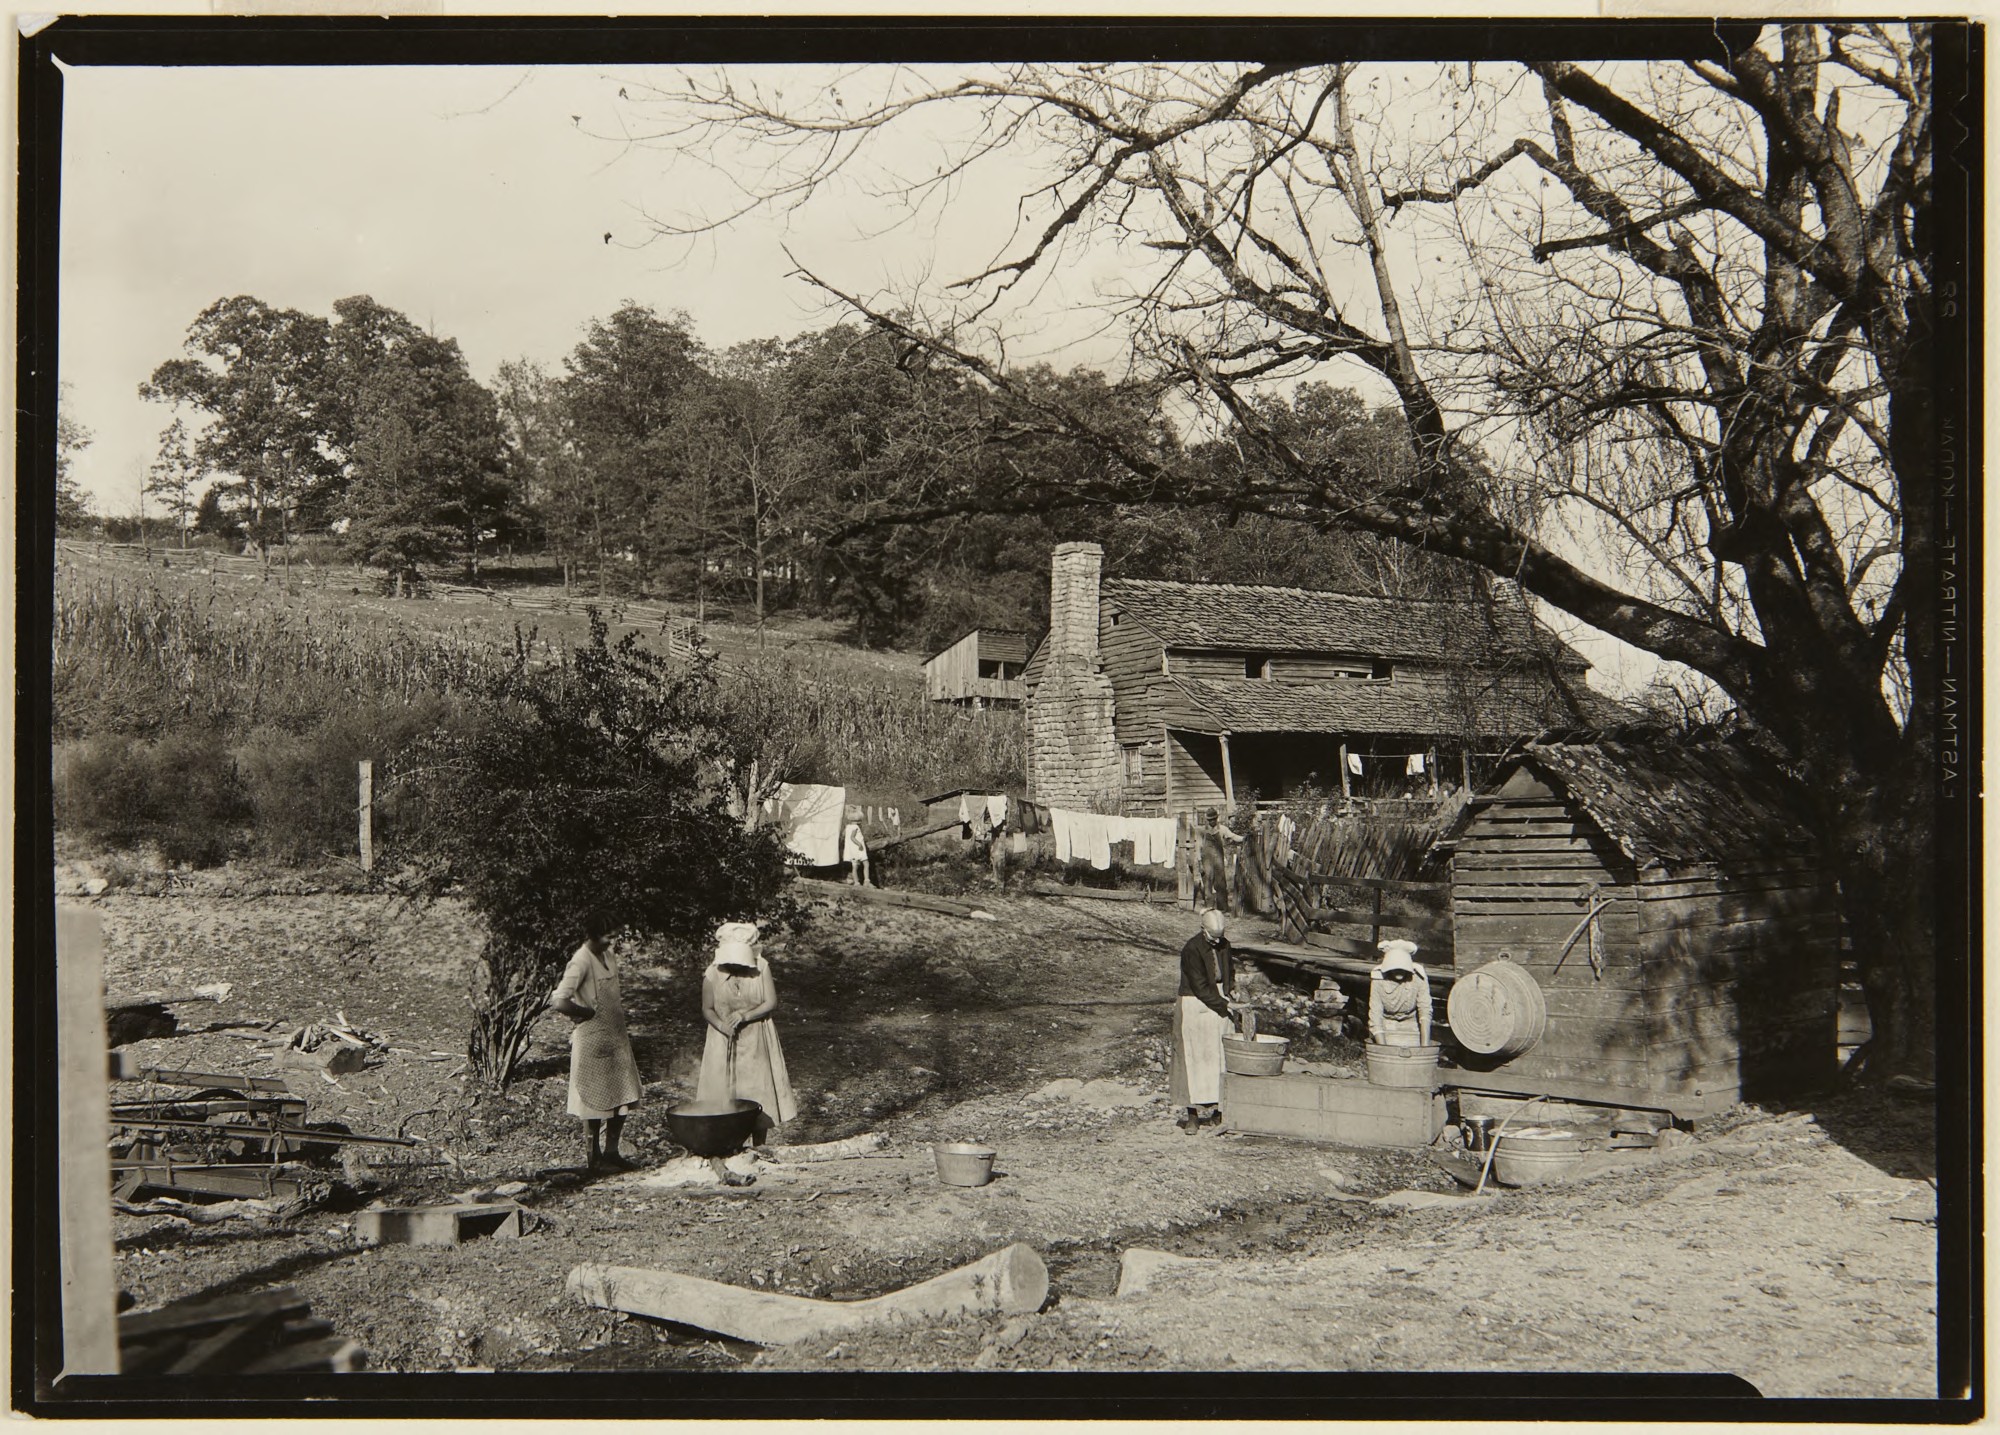 Washday at the Stooksberry homestead near Andersonville, Tennessee  (x1973-22)